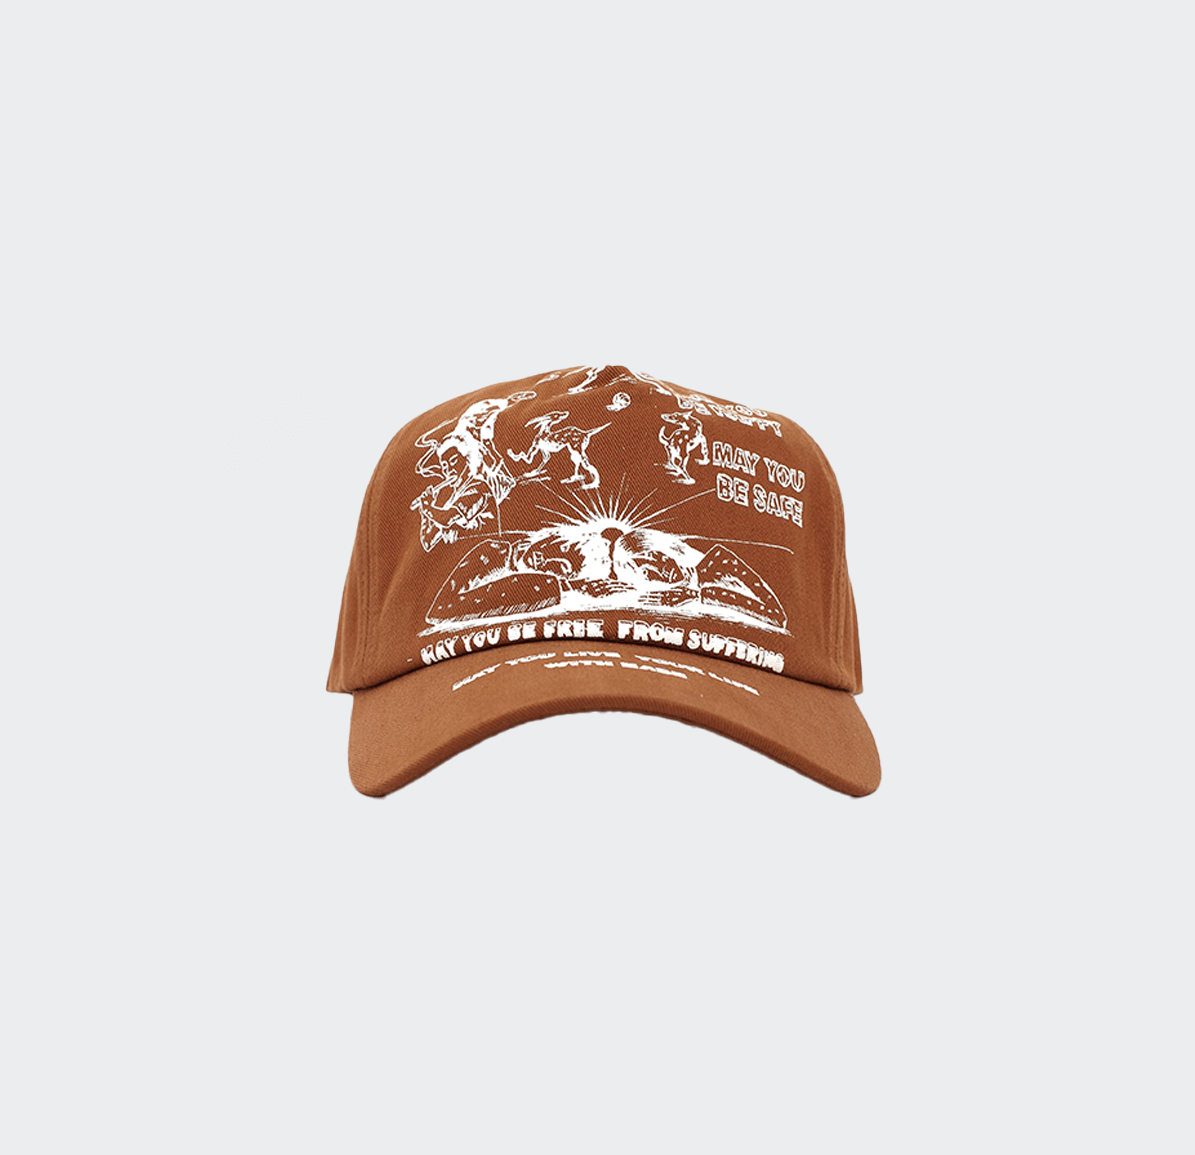 Jungles Live Your Life With Ease Trucker Cap - Brown - Jungles - State Of Play